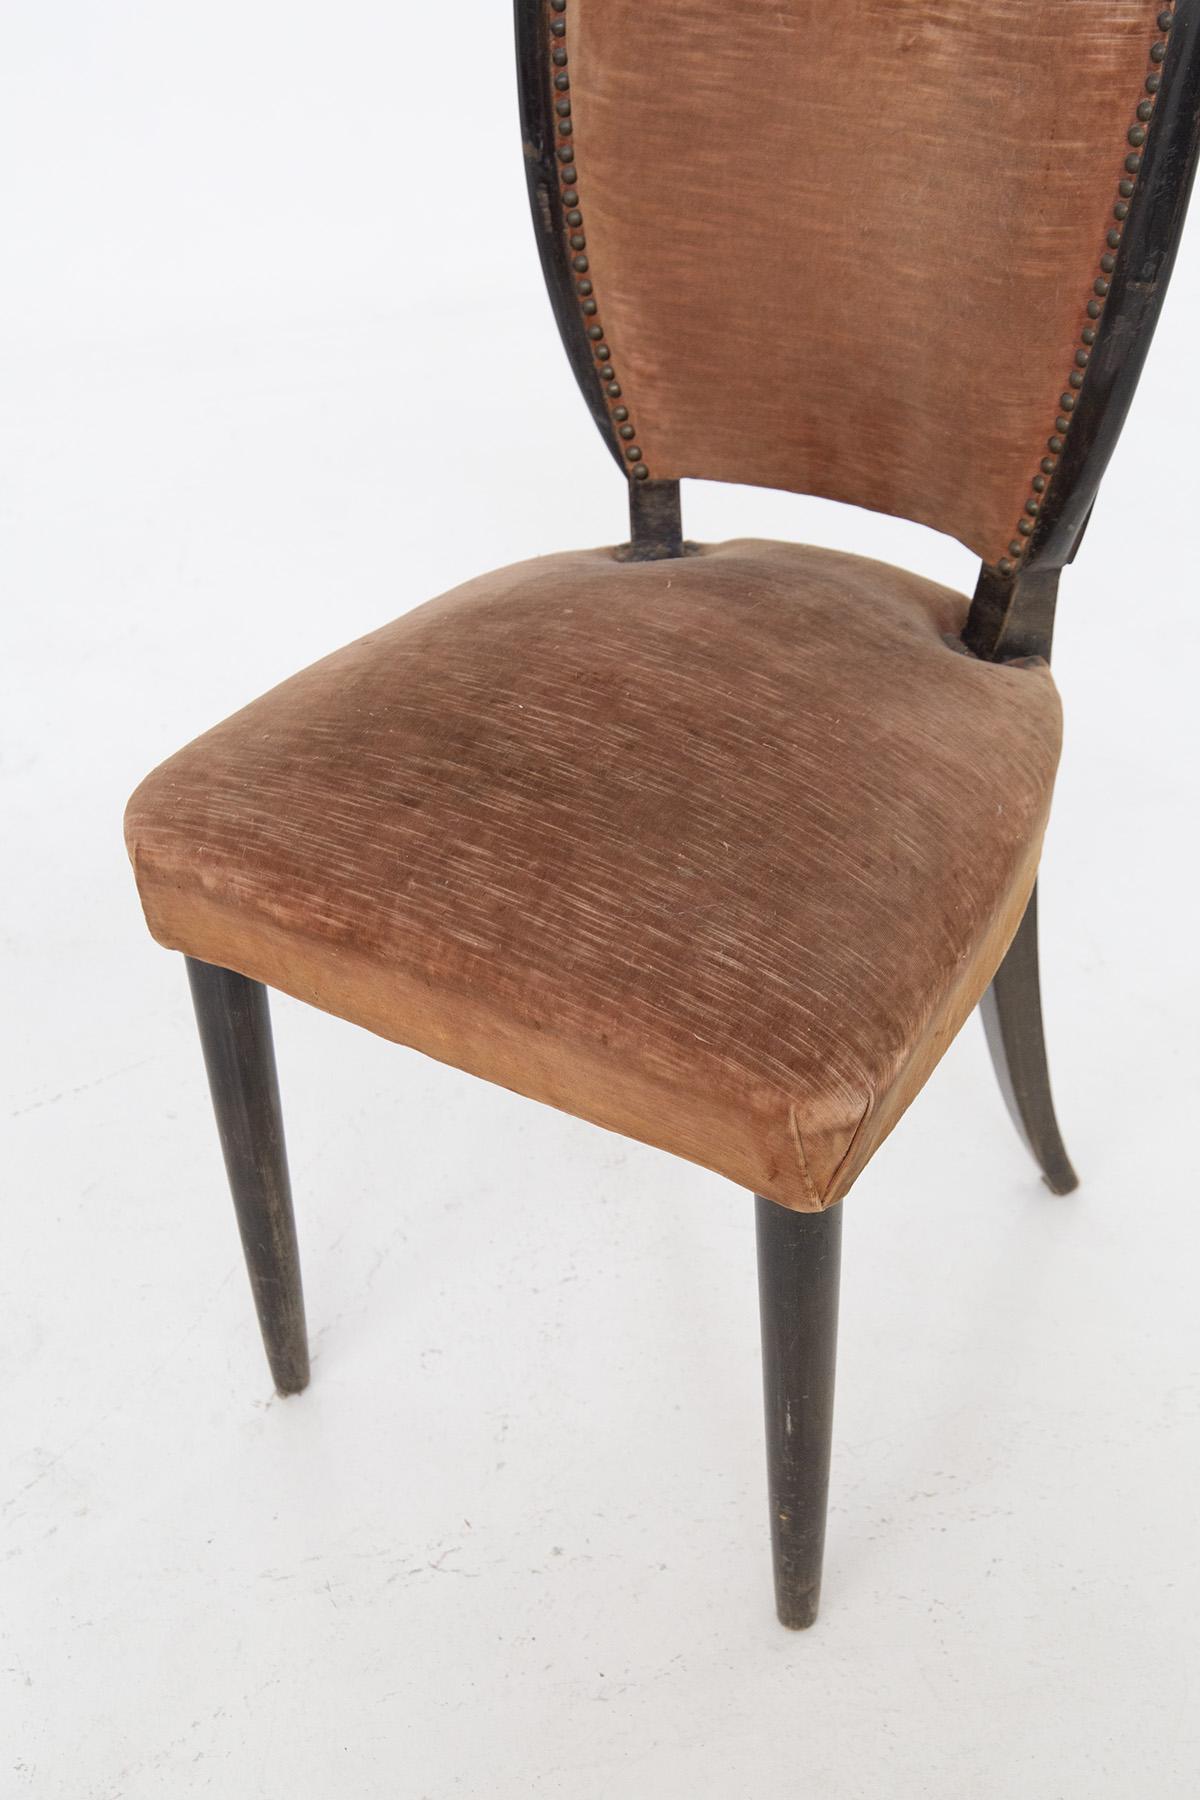 Wool Melchiorre Bega Italian Wooden Chairs with Studs and Orange Velvet